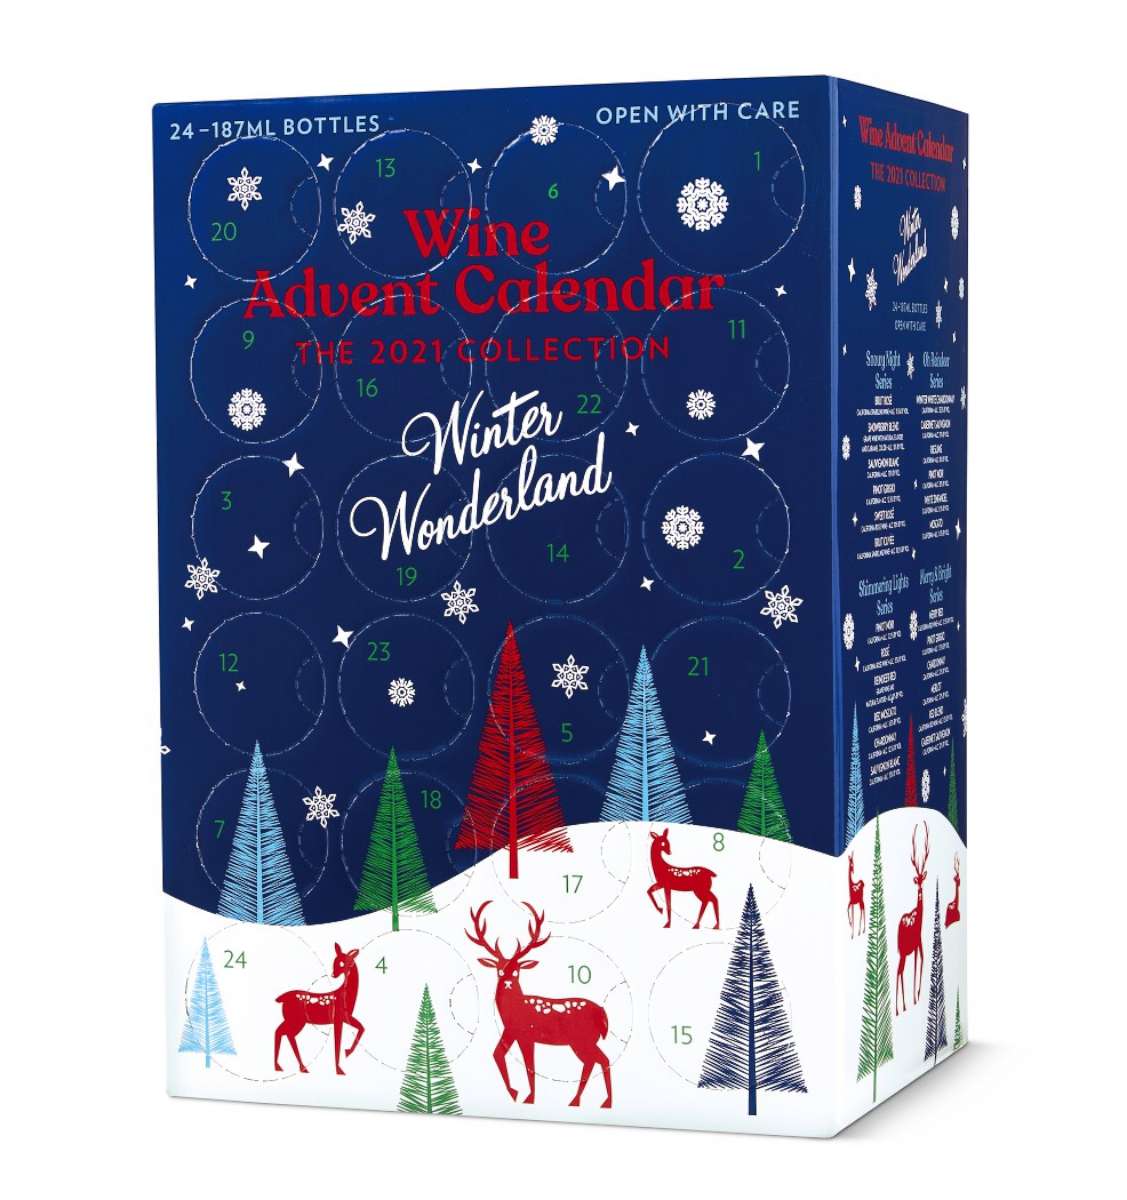 PHOTO: The Aldi 2021 Collection Wine Advent calendar is back by popular demand this holiday season.